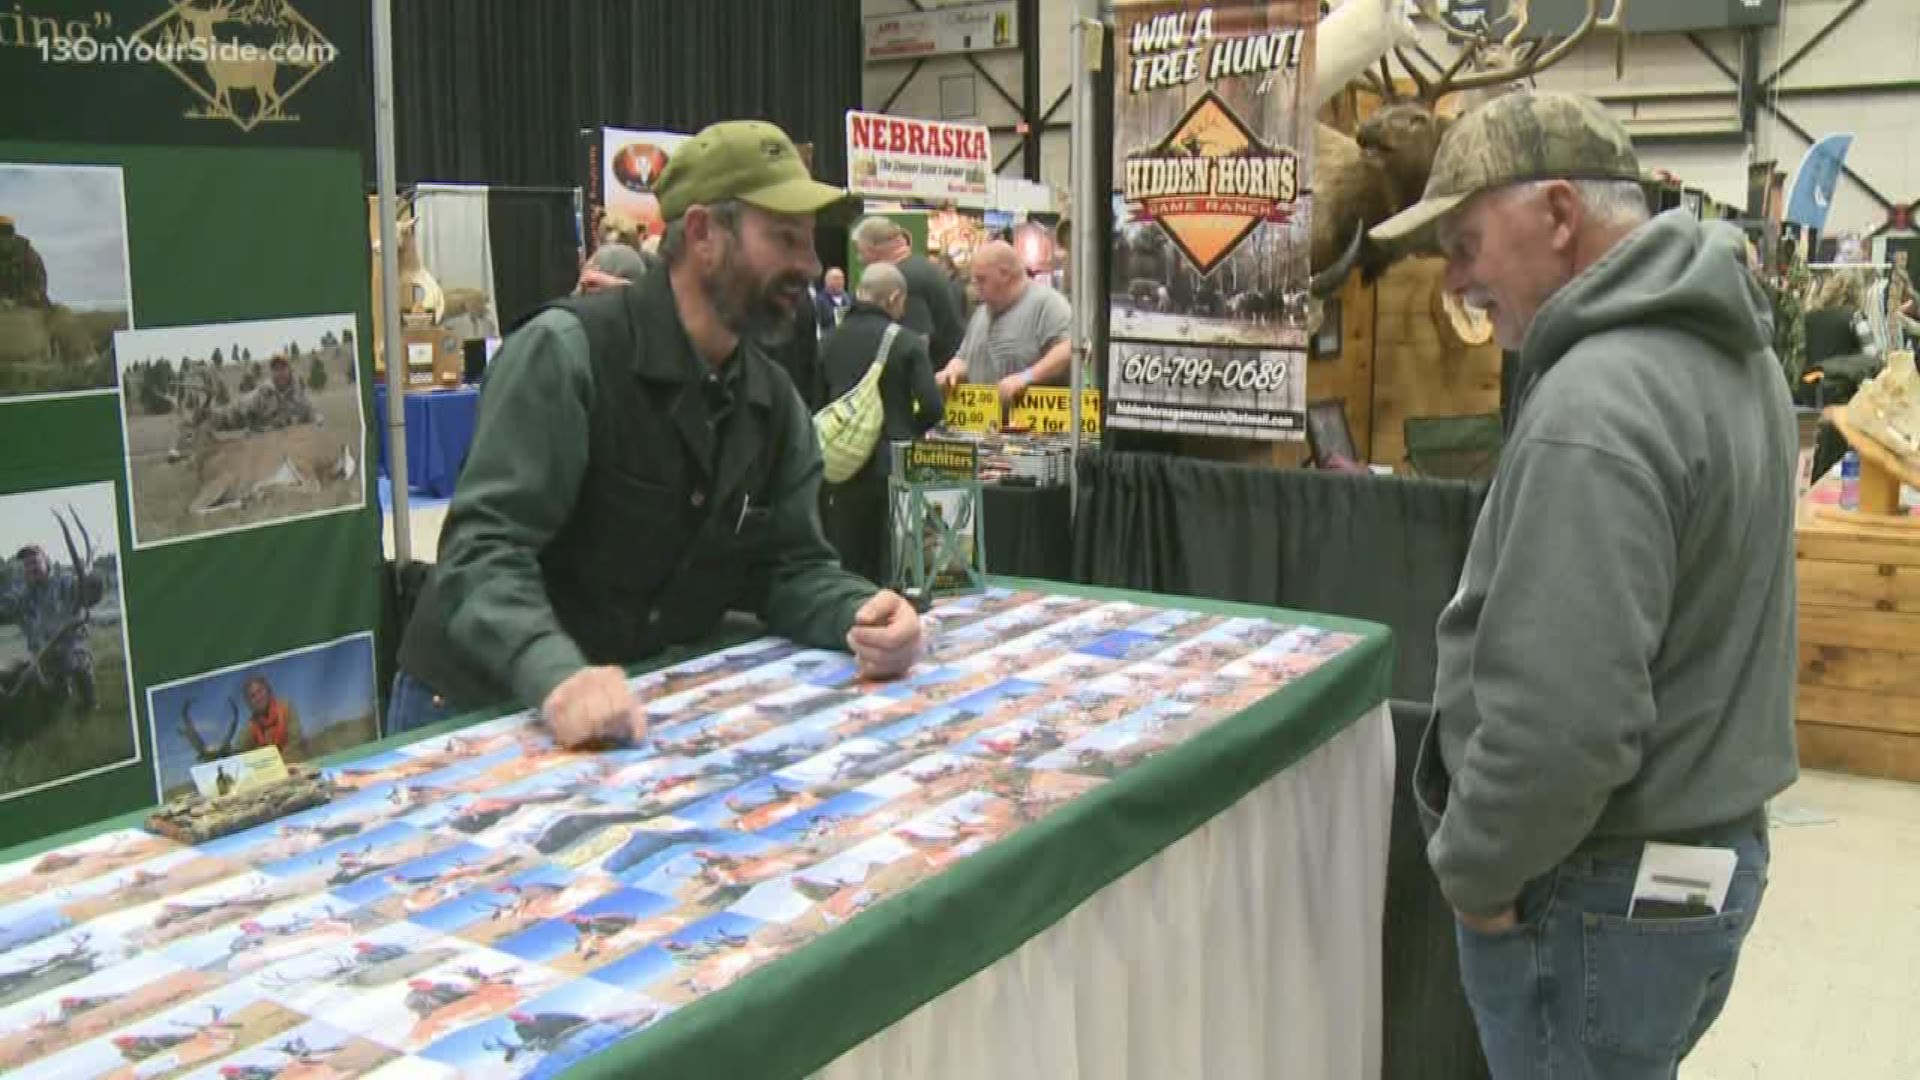 More than 350 exhibitors and kid-friendly activities are part of the annual Weller Auto Huntin’ Time Expo, which runs Friday through Sunday in Walker.